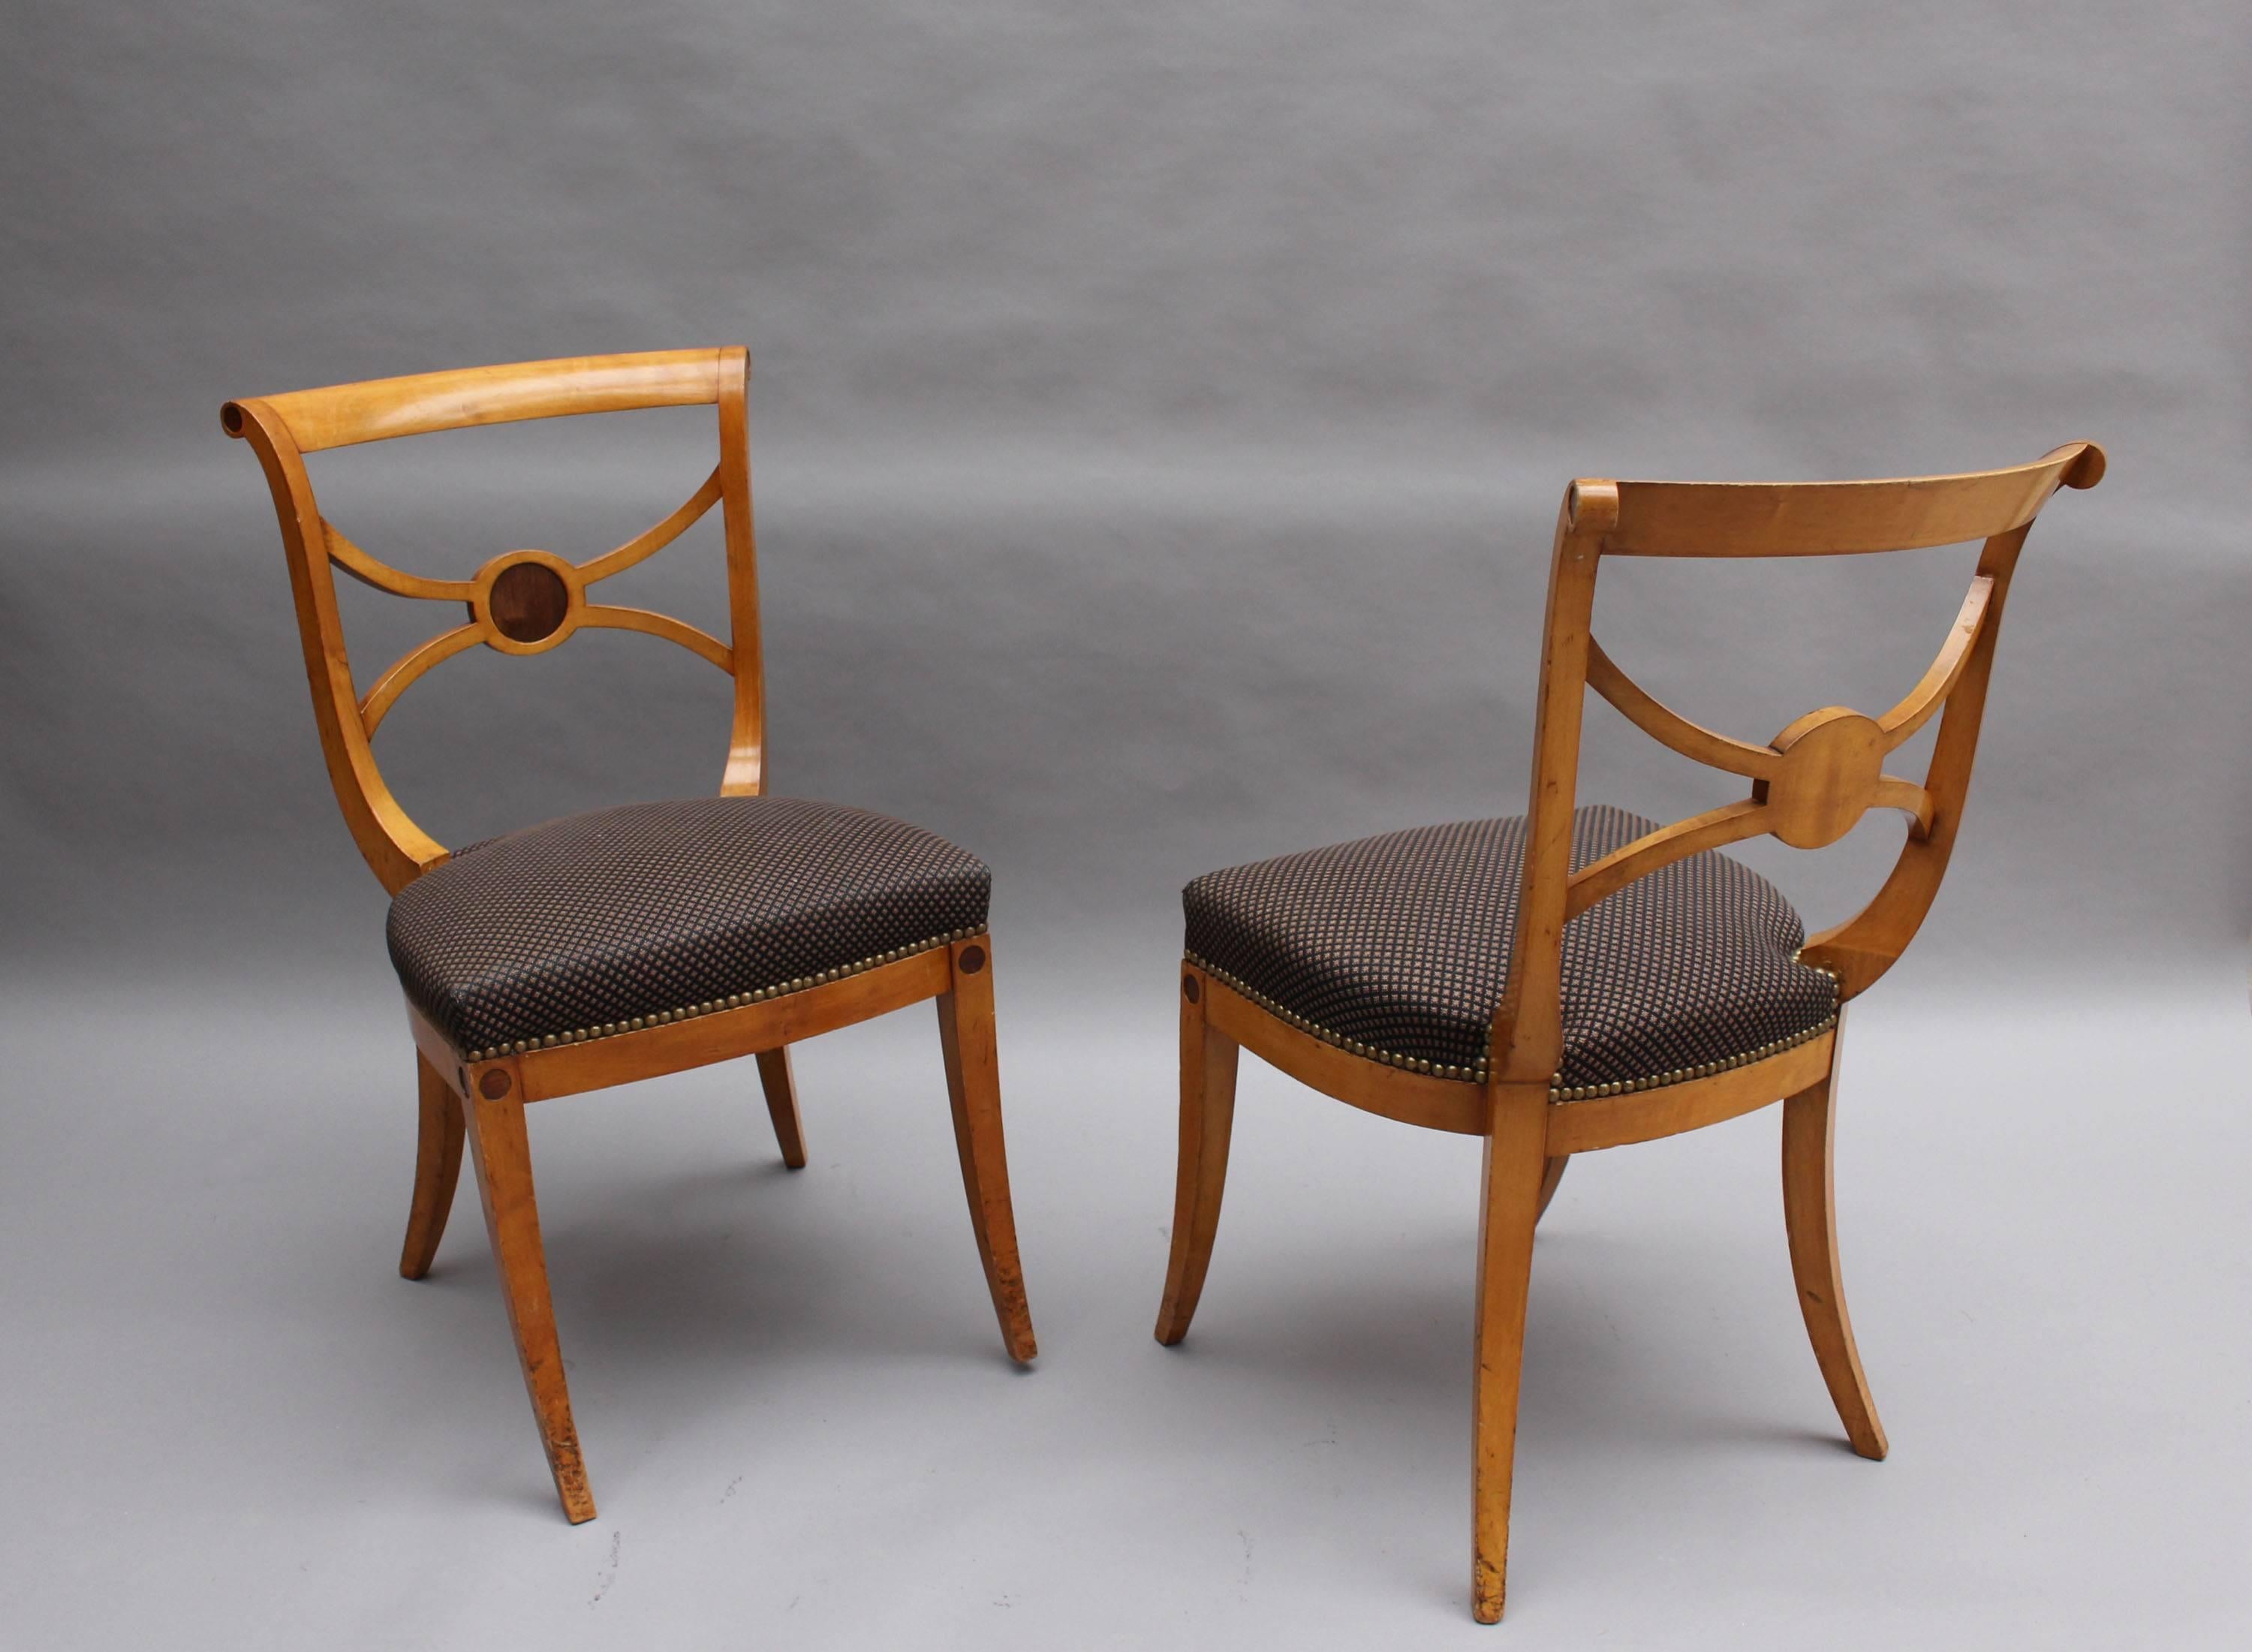 Sycamore A Set of 14 Fine French Art Deco Chairs by Ernest Boiceau (12 side and 2 arm)